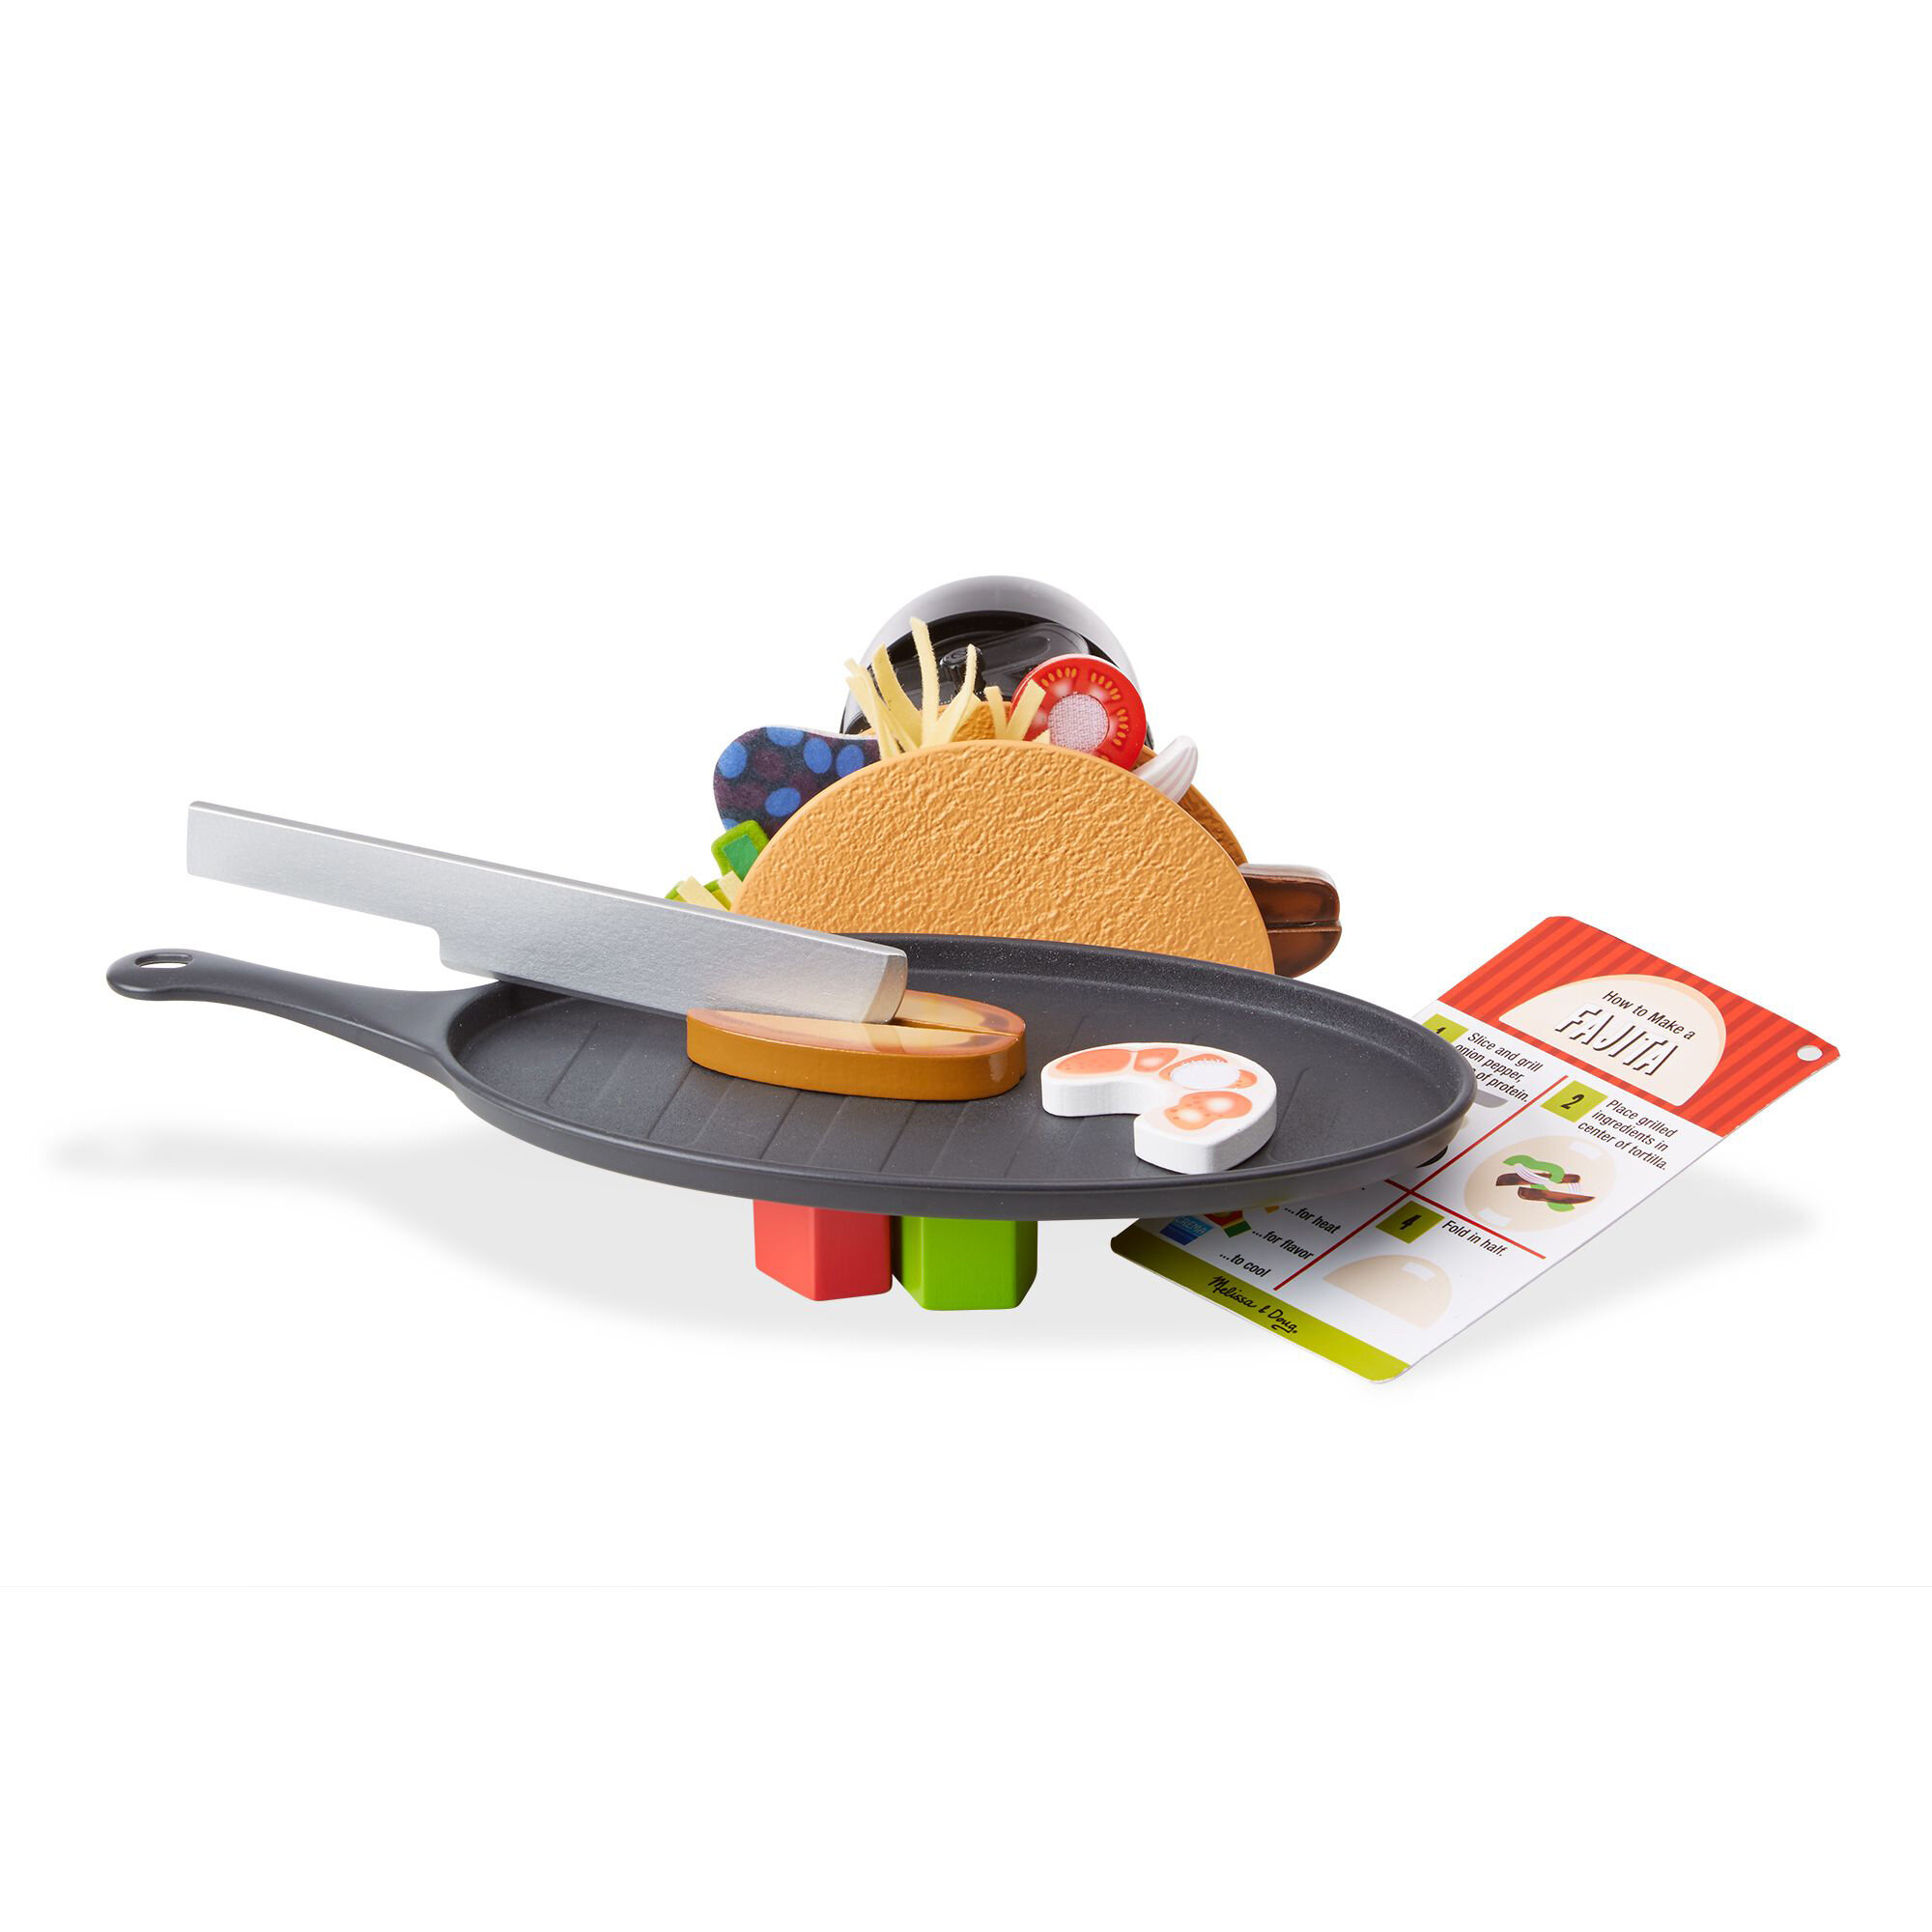 Play Food Set for Kids Mexican Taco Pretend Play Kitchen Toy for Toddlers  with Skillet and Realistic Food Accessories 21 Pieces Ages 3 4 5 6 7 8